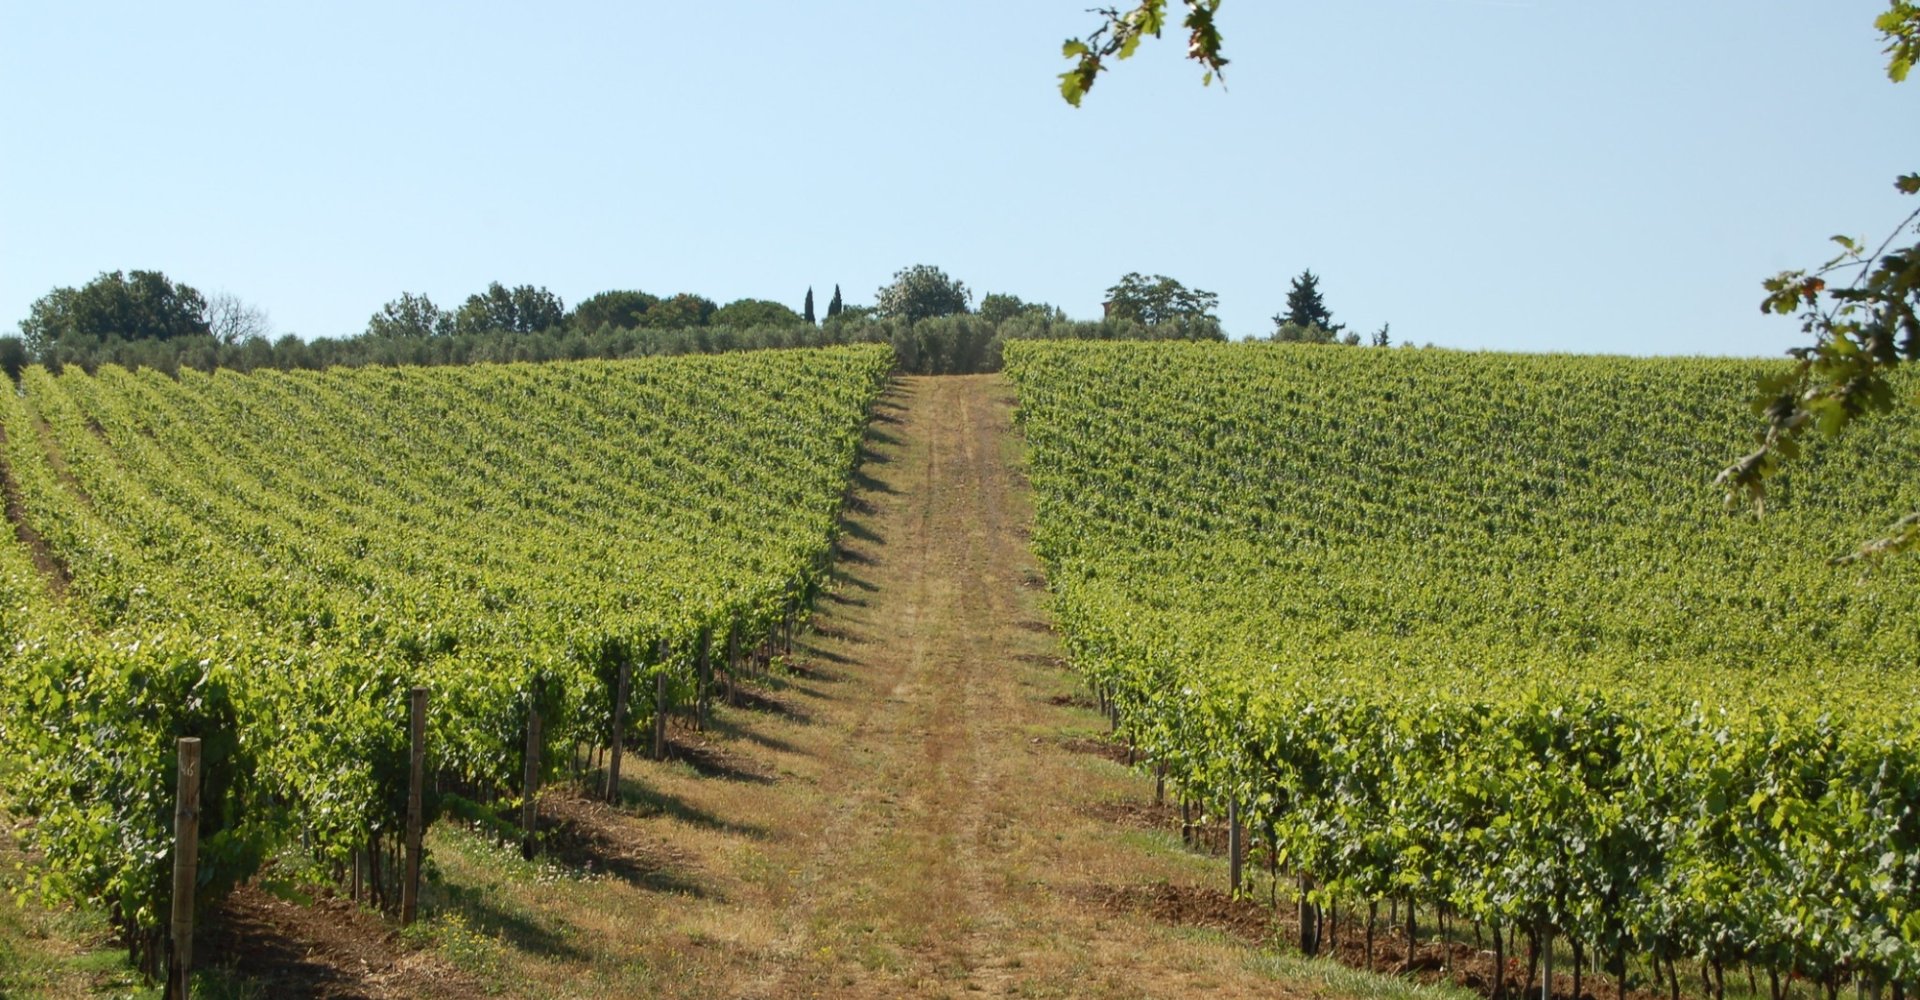 The DOCG wines of Tuscany